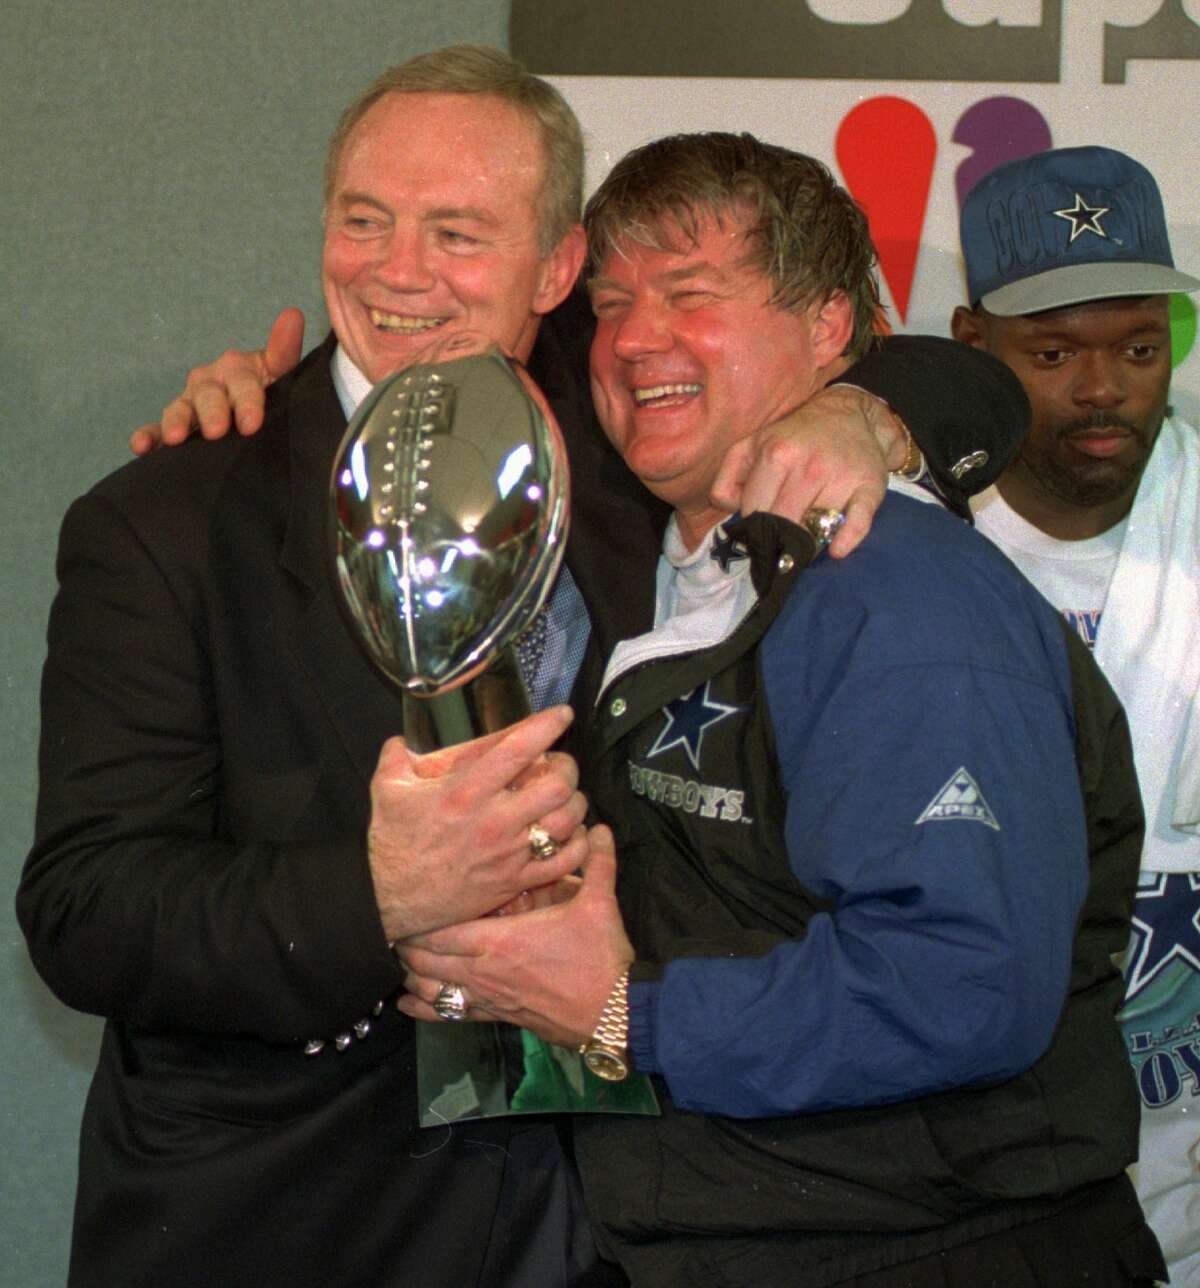 In this Jan. 30, 1994 file photo, Dallas Cowboys owner Jerry Jones, left, and coach Jimmy Johnson celebrate with the Vince Lombardi trophye fter defeating the Buffalo Bills 30-13 in Super Bowl XXVIII at the Georgia Dome in Atlanta. Johnson made 51 trades in his five years in Dallas, "more than the entire league put together," he proudly noted. That's how the Cowboys built the crux of their championship rosters.